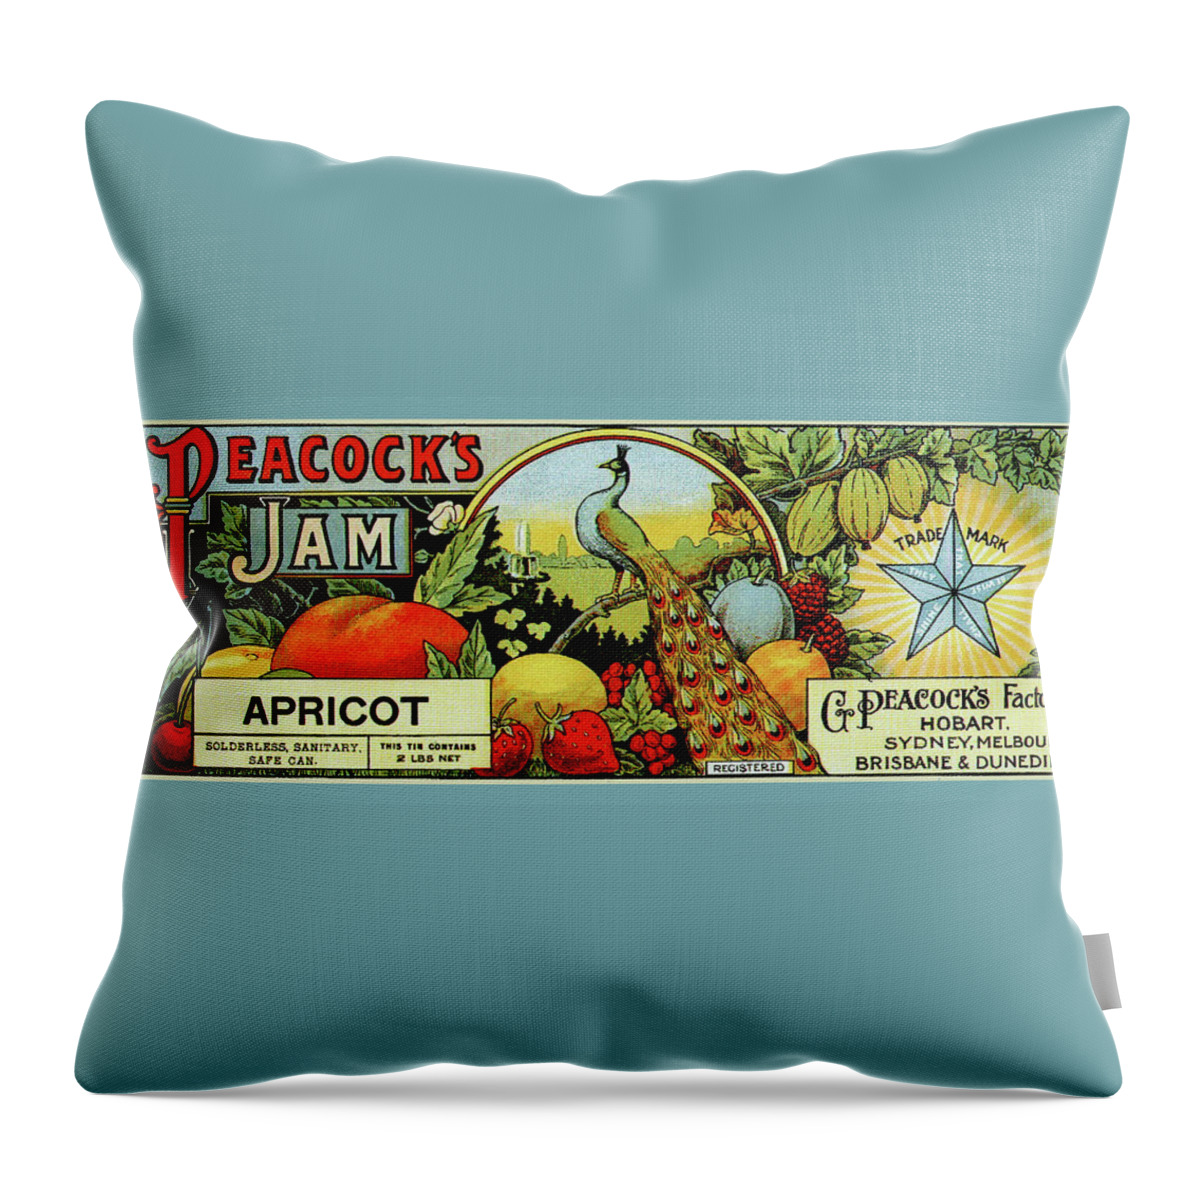 Peacock Throw Pillow featuring the painting Peacock's Jam - Apricot by Unknown